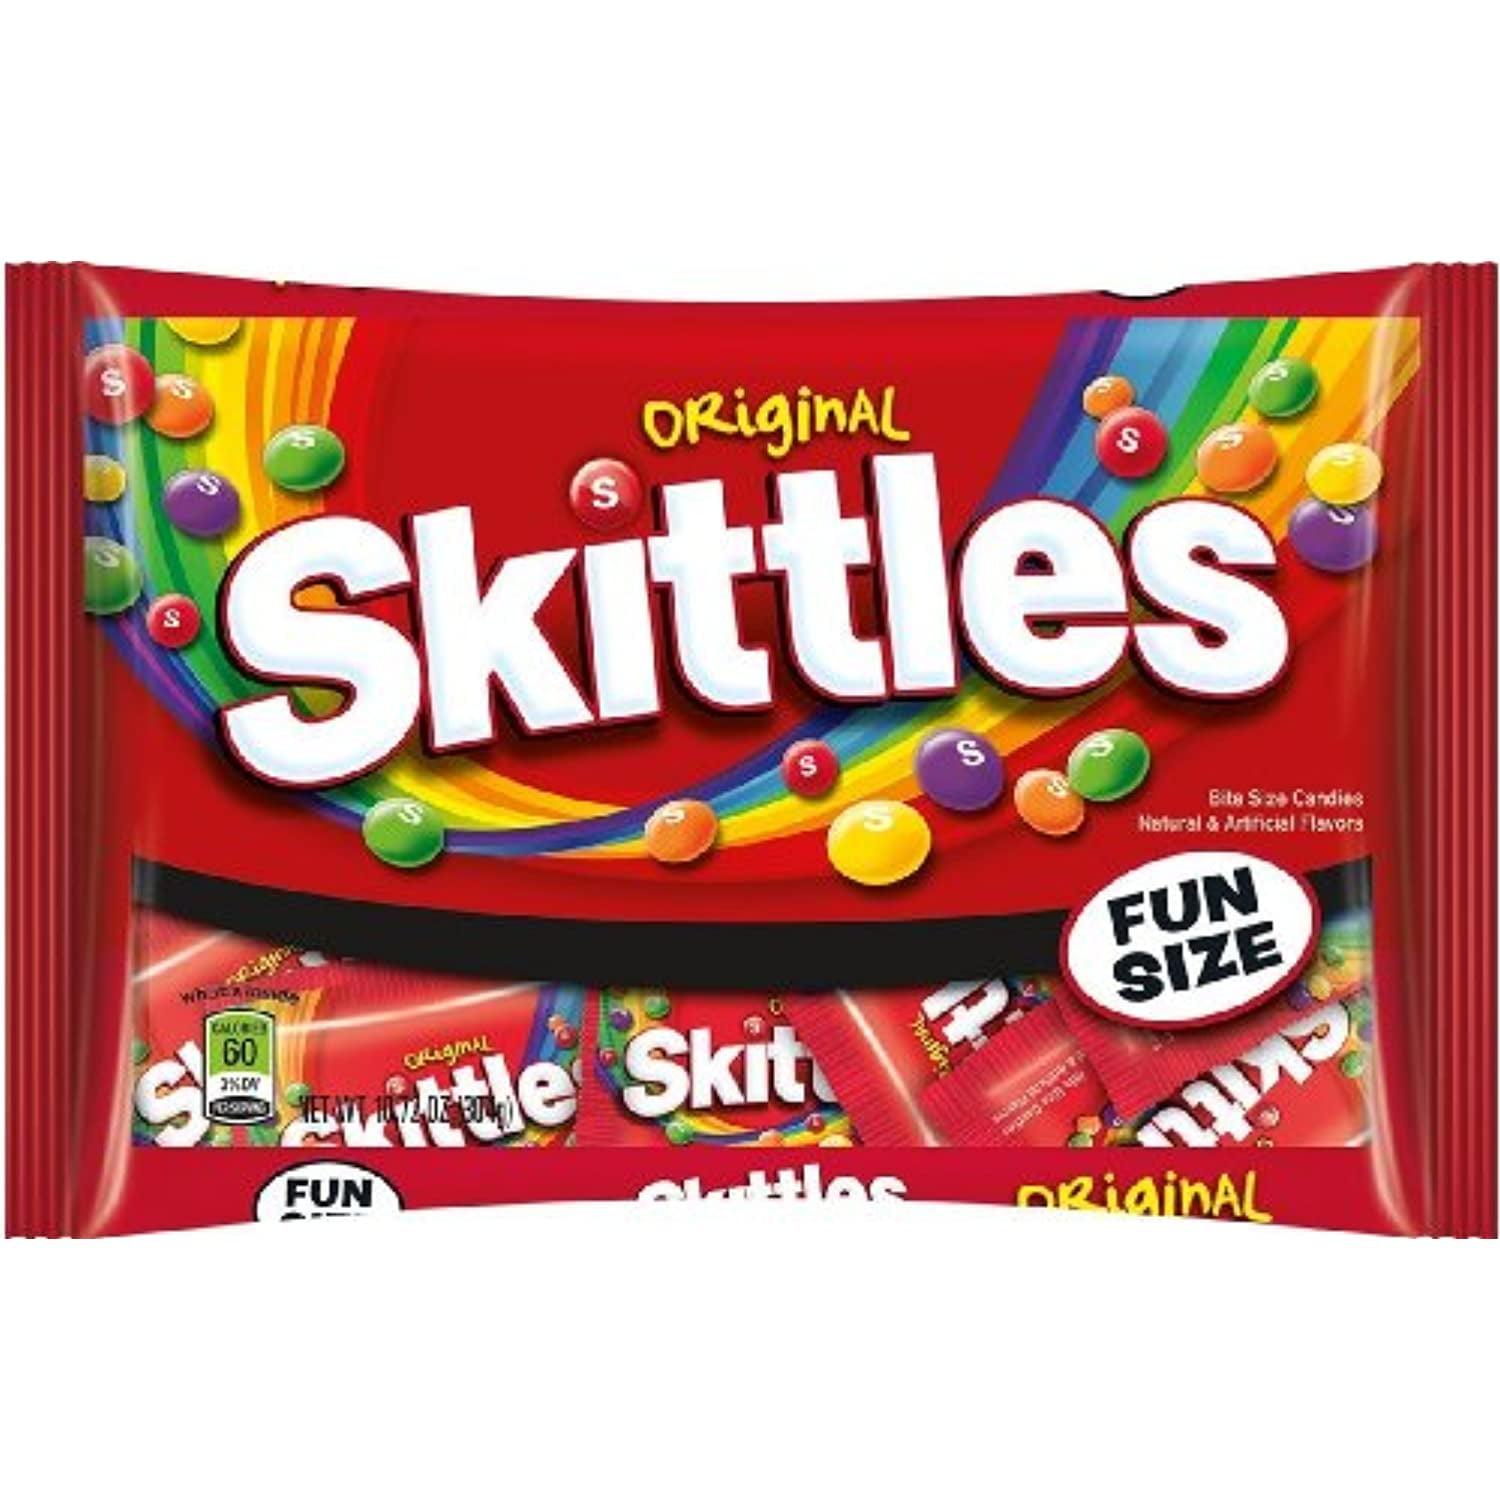 Skittles Sharing Size Bag Just $2.83 Shipped on Amazon | Hip2Save